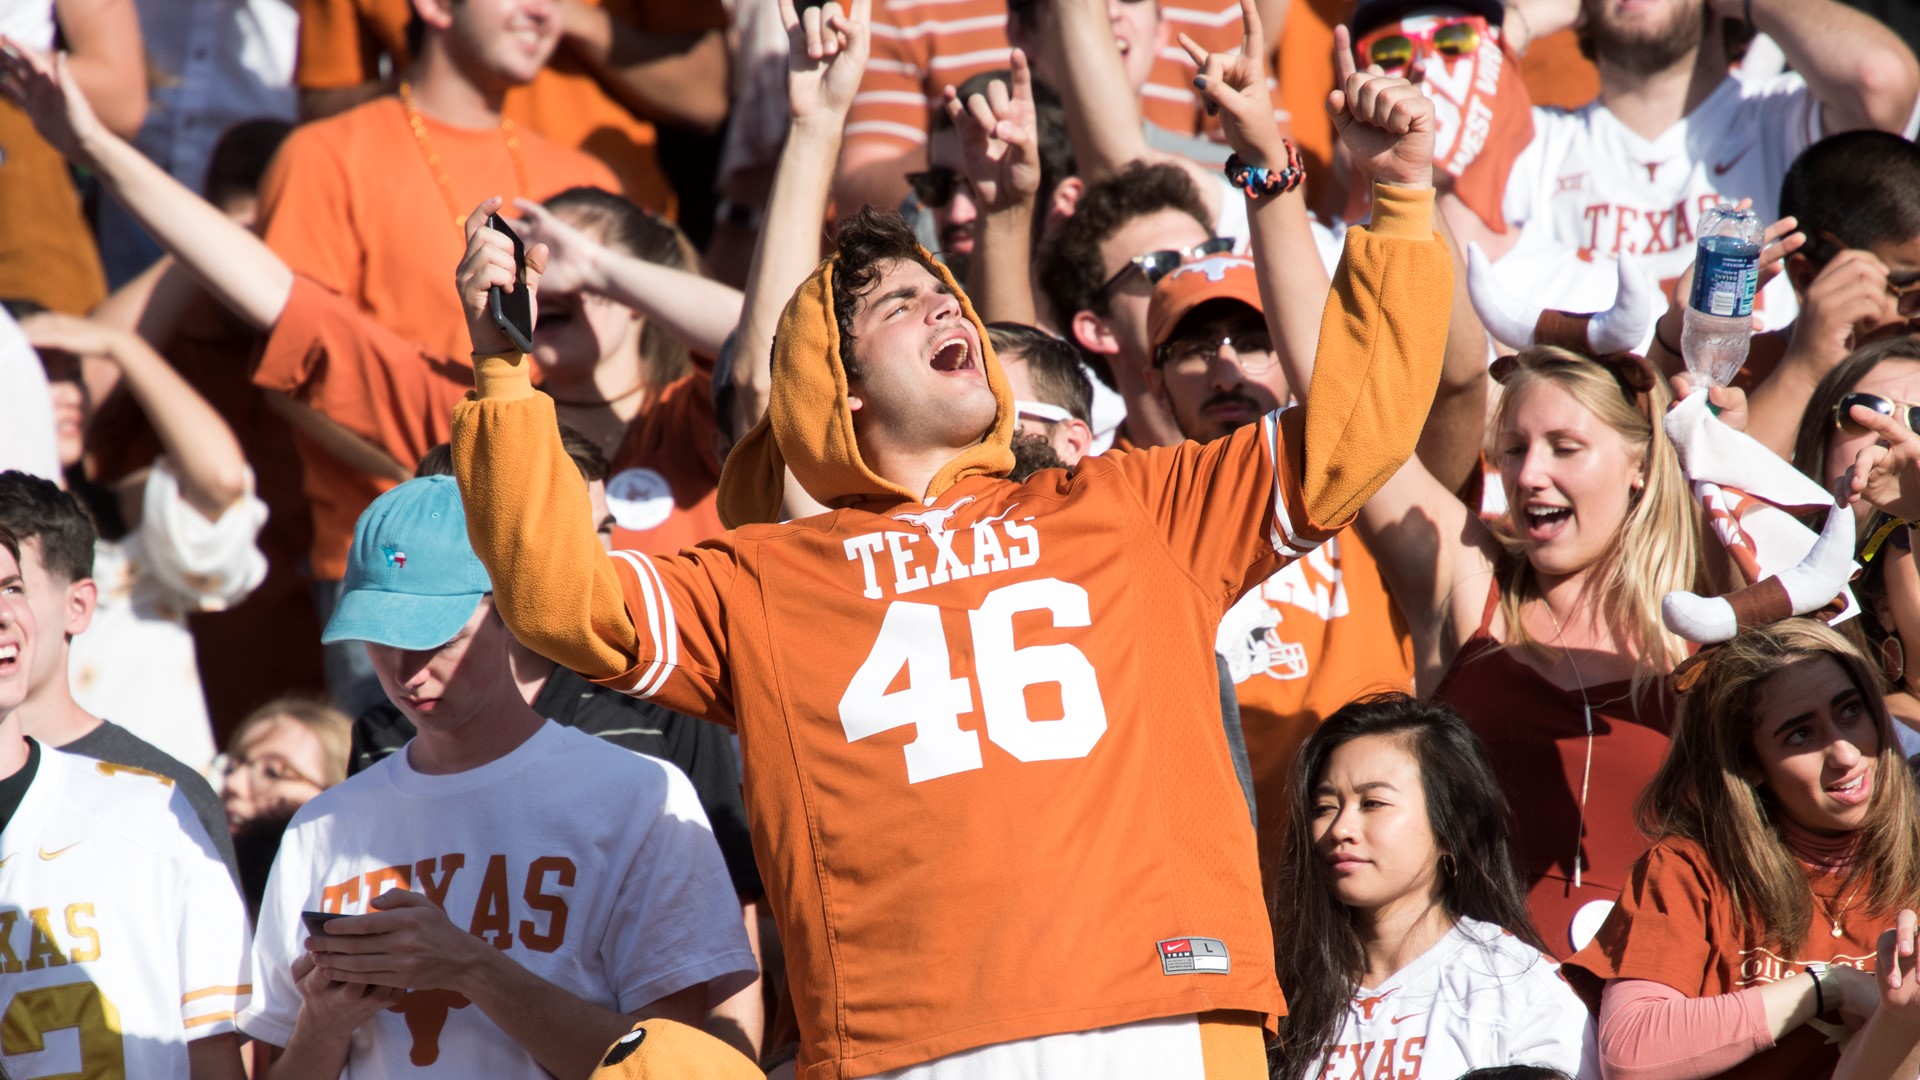 UT Austin fans are gearing up for the upcoming Texas football season.